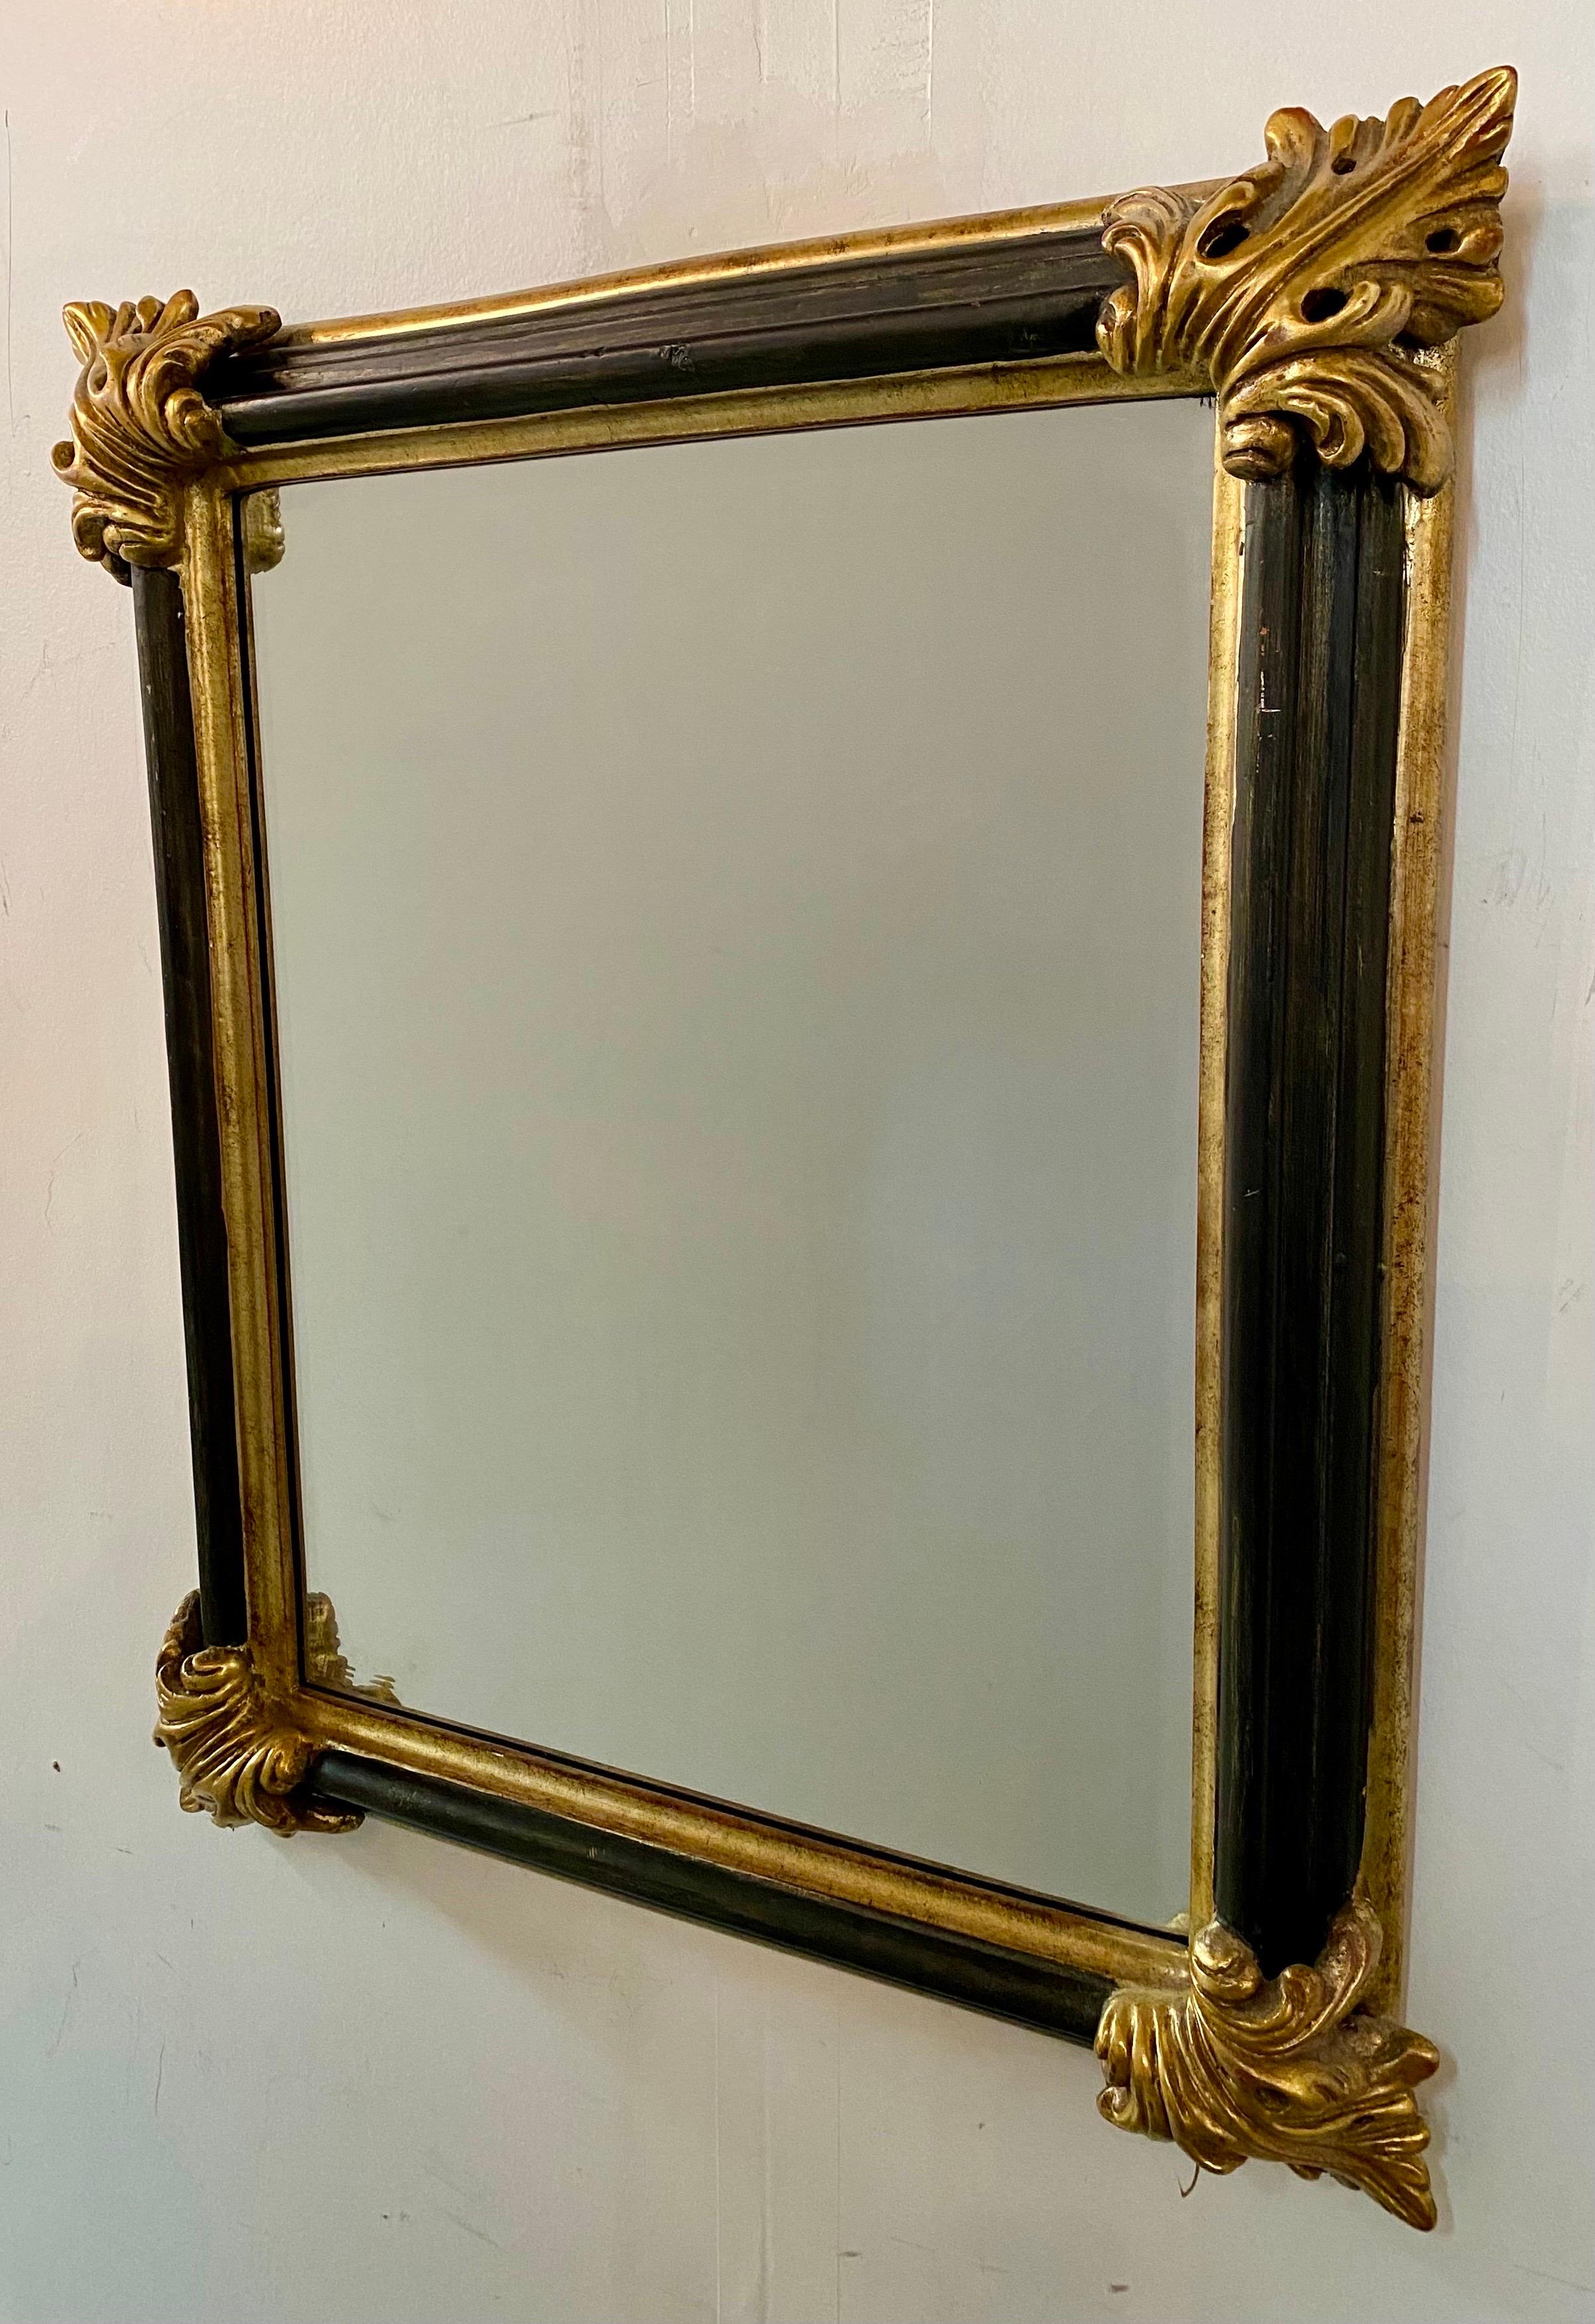 An elegant French Rococo style rectangular mirror. The sturdy and well made mirror features ebony black frame embellished with gold gilt. Each corner shows a large gold leaf design adding style to the piece. Simple with a subtle opulence, the hand-